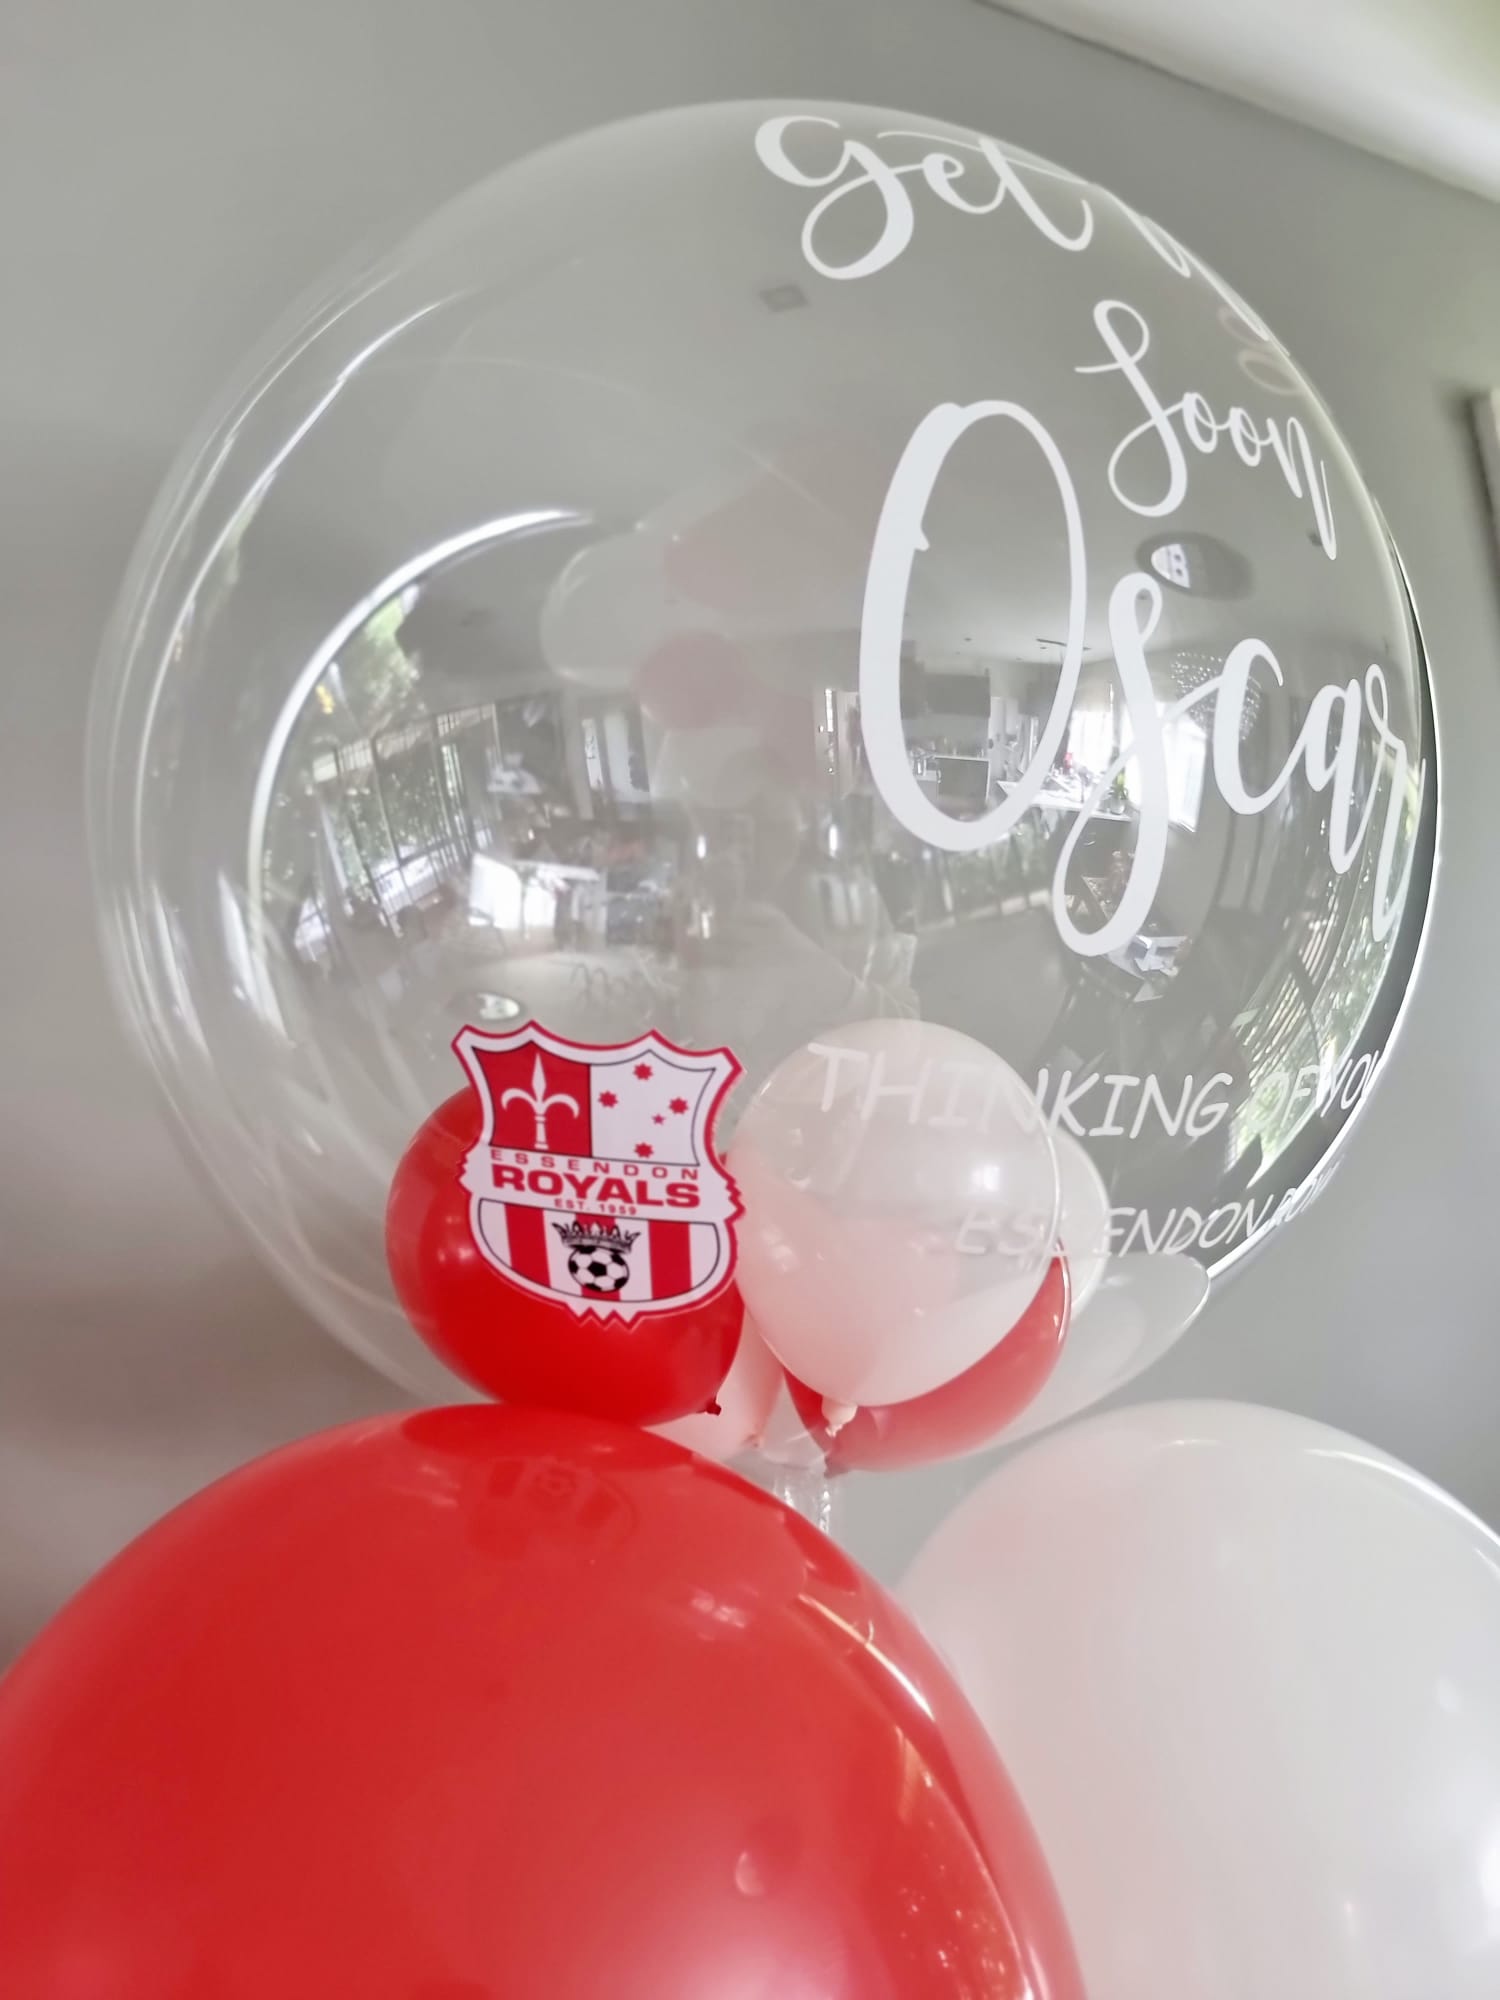 Red and White Personalised Balloon Bouquet Delivered in Melbourne 7 days Brand Logo Printed Essendon Royals Soccer